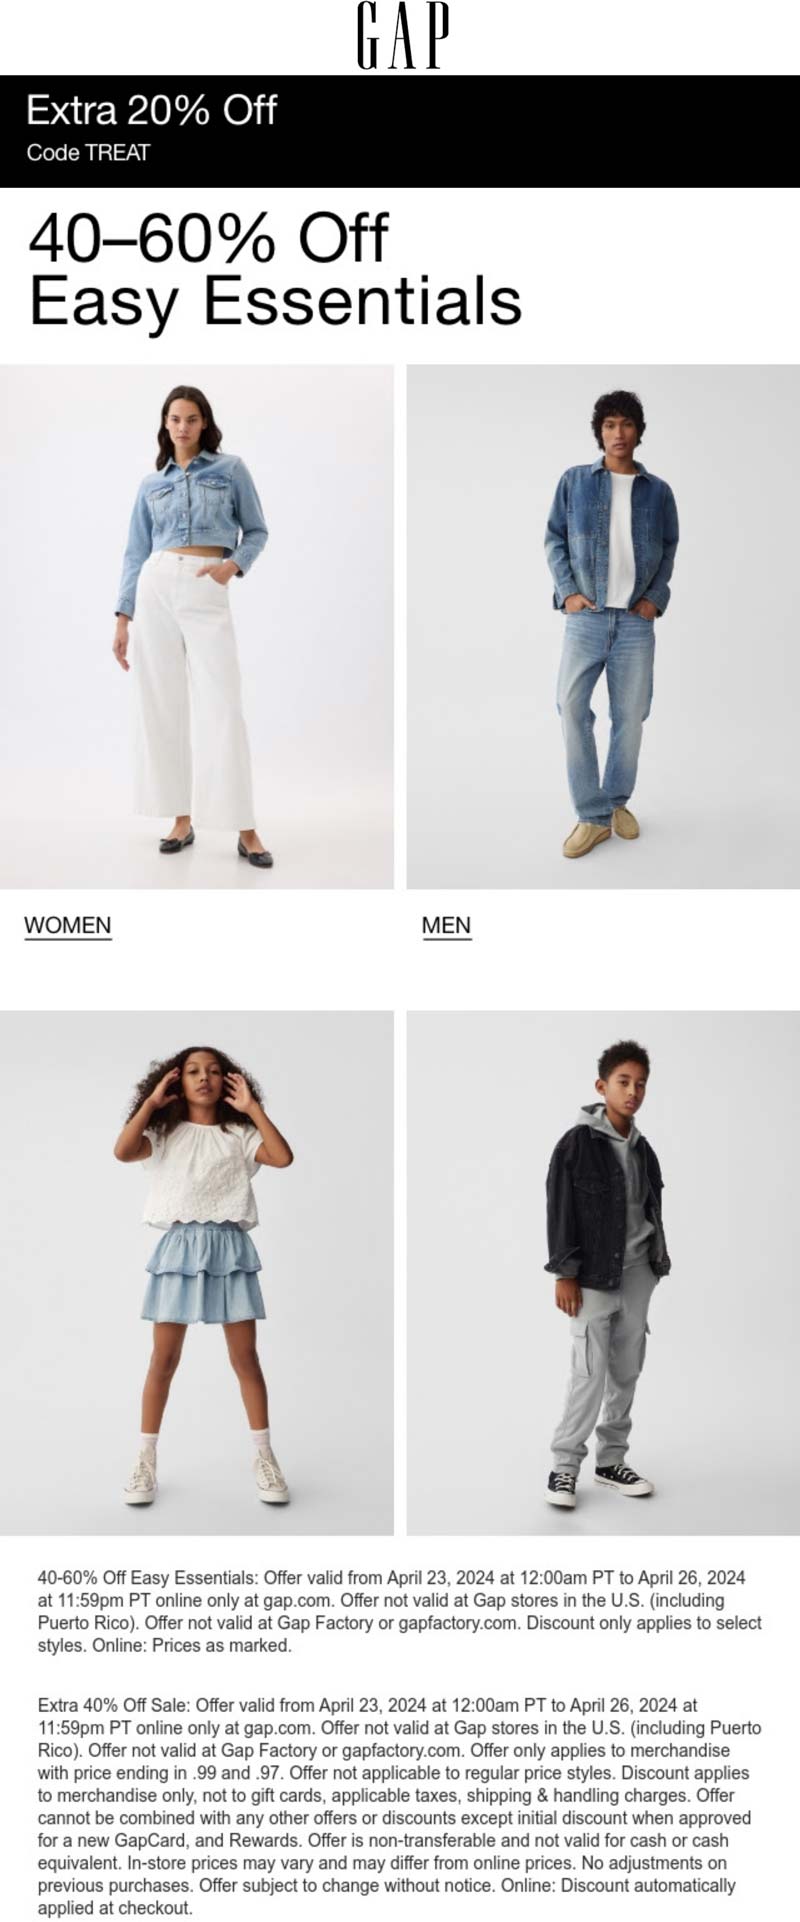 Gap stores Coupon  Extra 40% off sale items + another 20% off at Gap via promo code TREAT #gap 